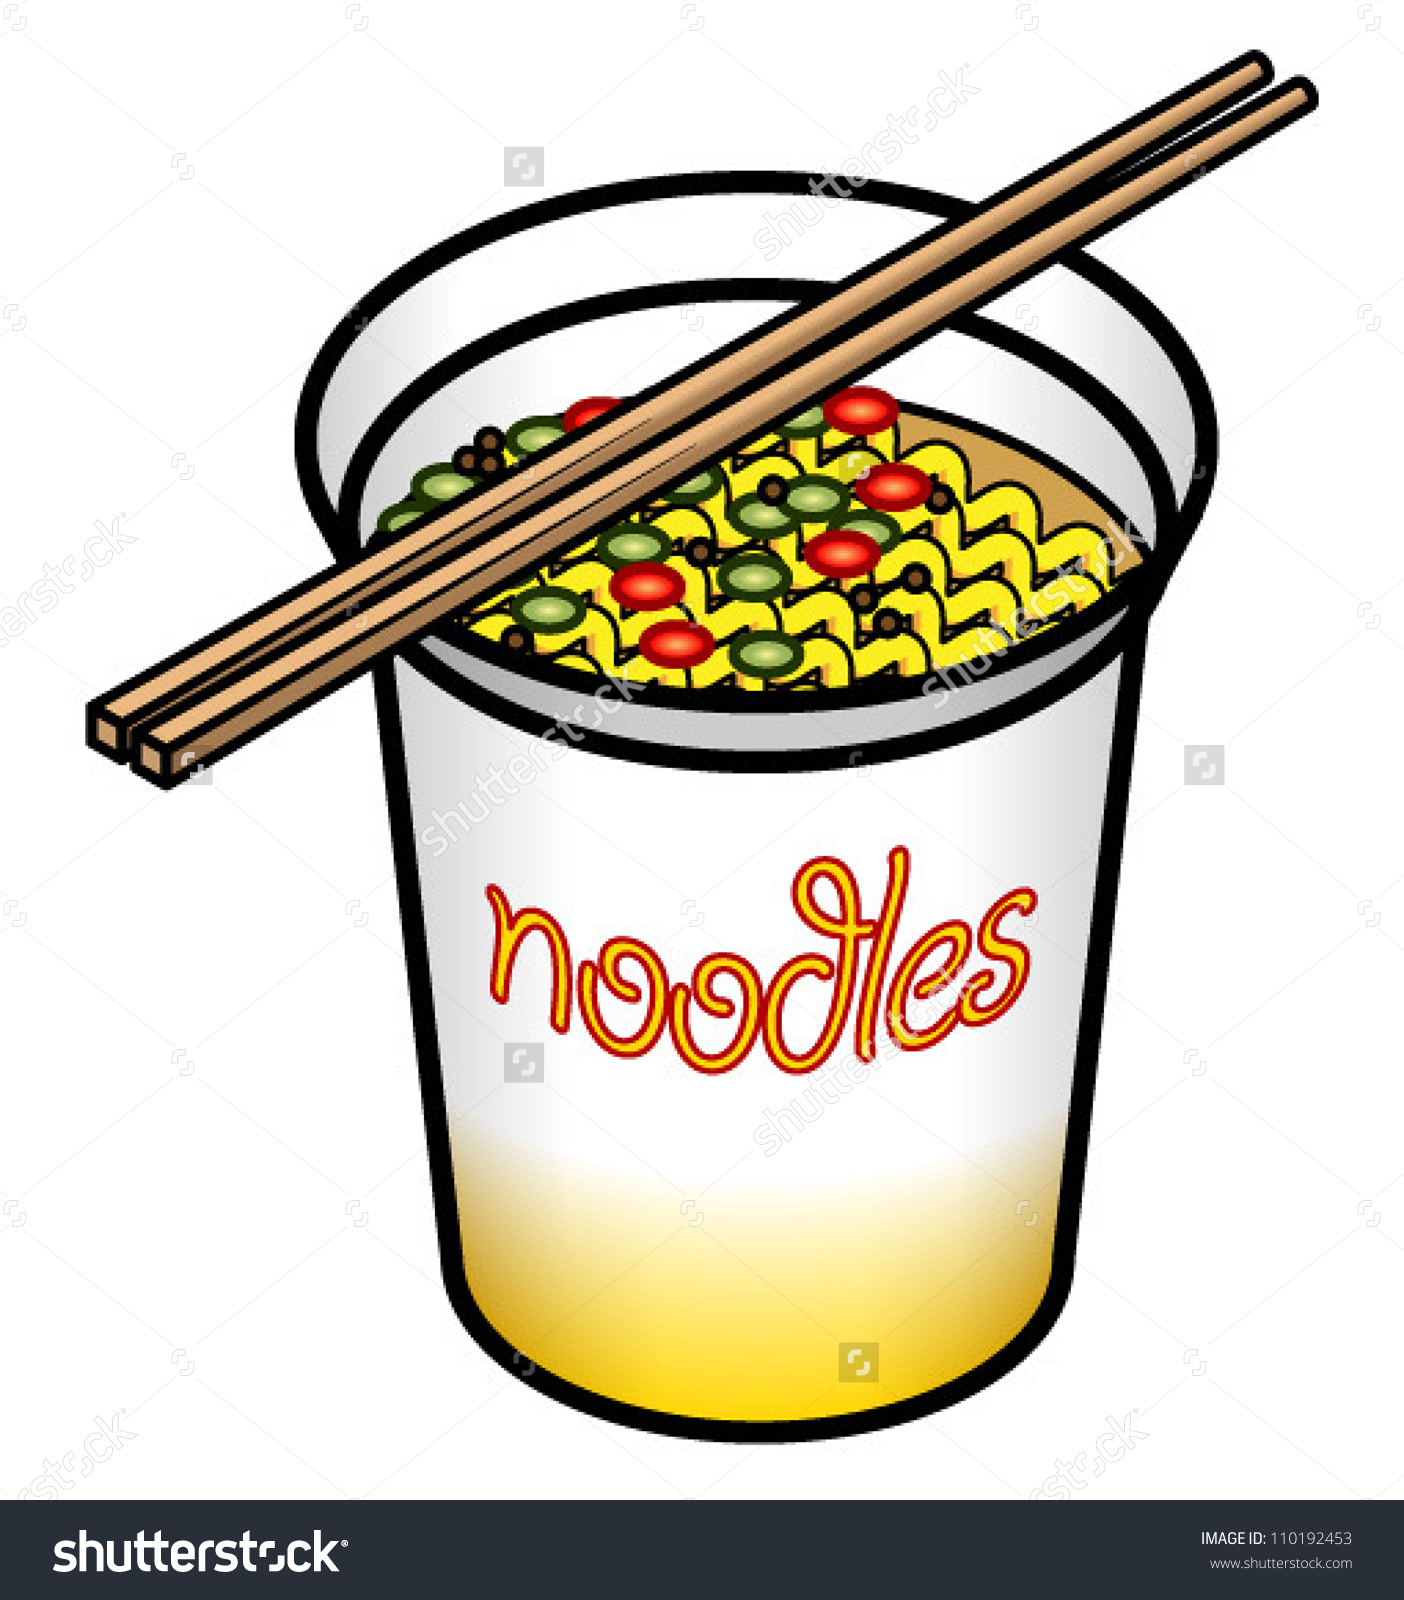 Instant noodles clipart 20 free Cliparts | Download images on